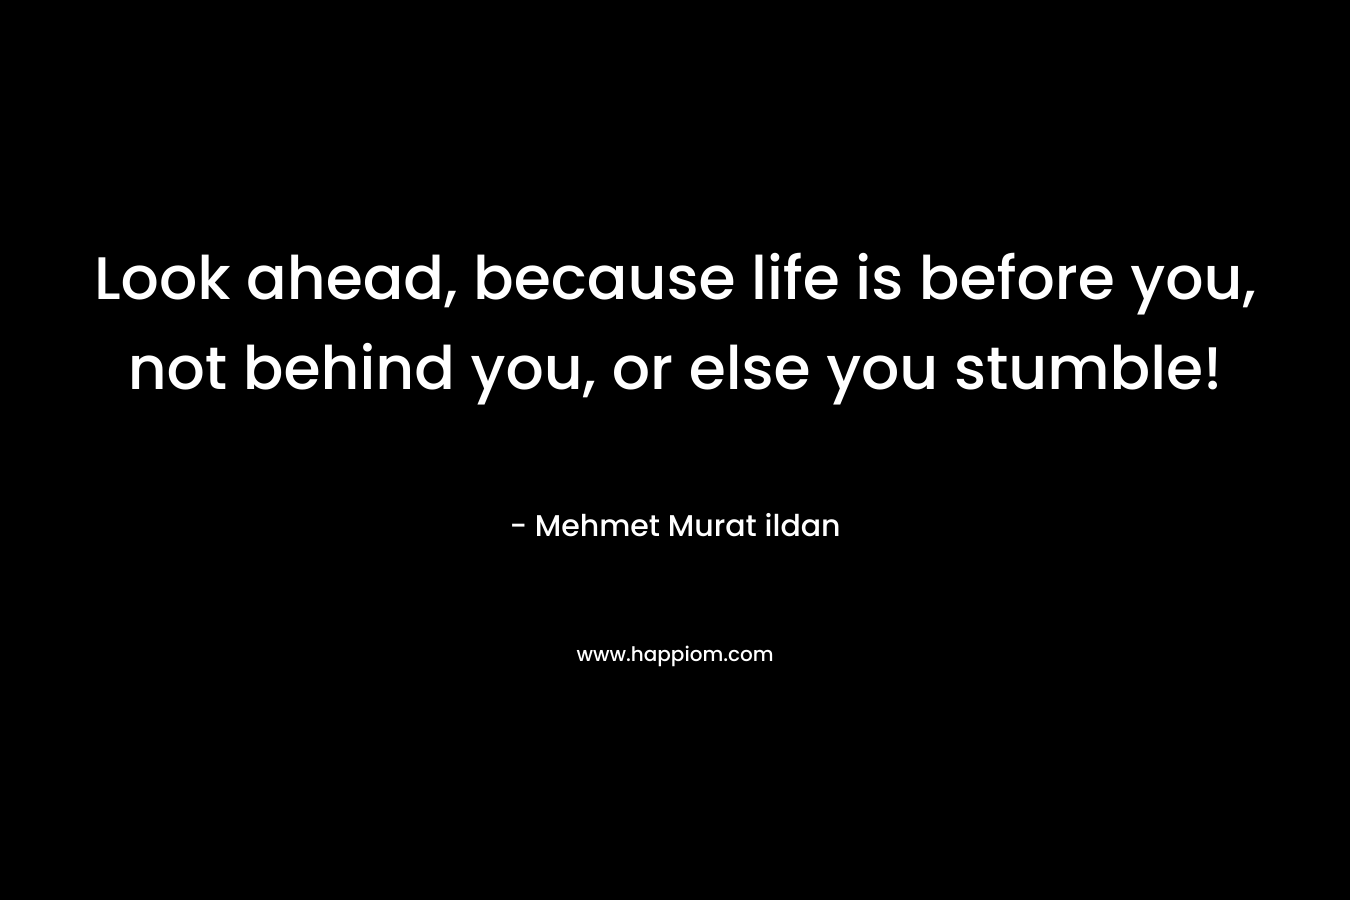 Look ahead, because life is before you, not behind you, or else you stumble!